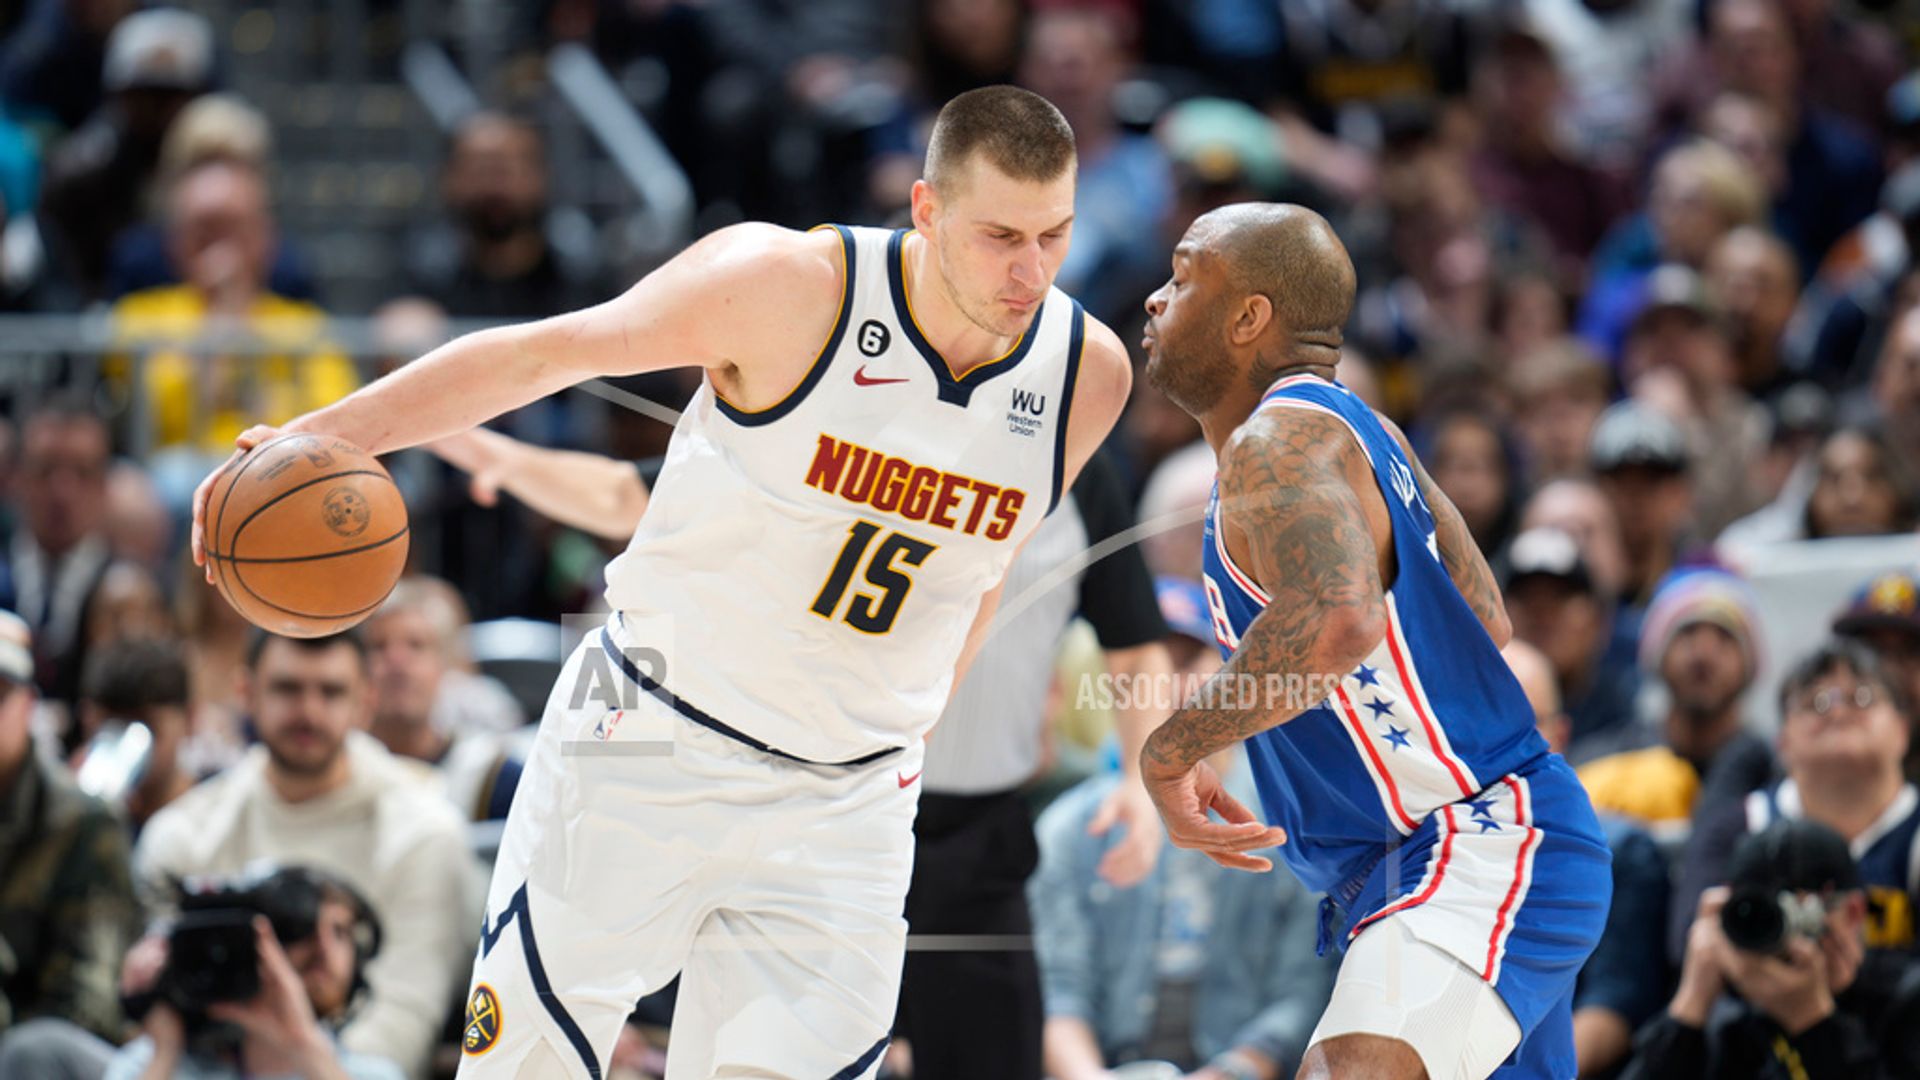 NBA round-up: Embiid sits out for 76ers, Jokic leads Nuggets to victory